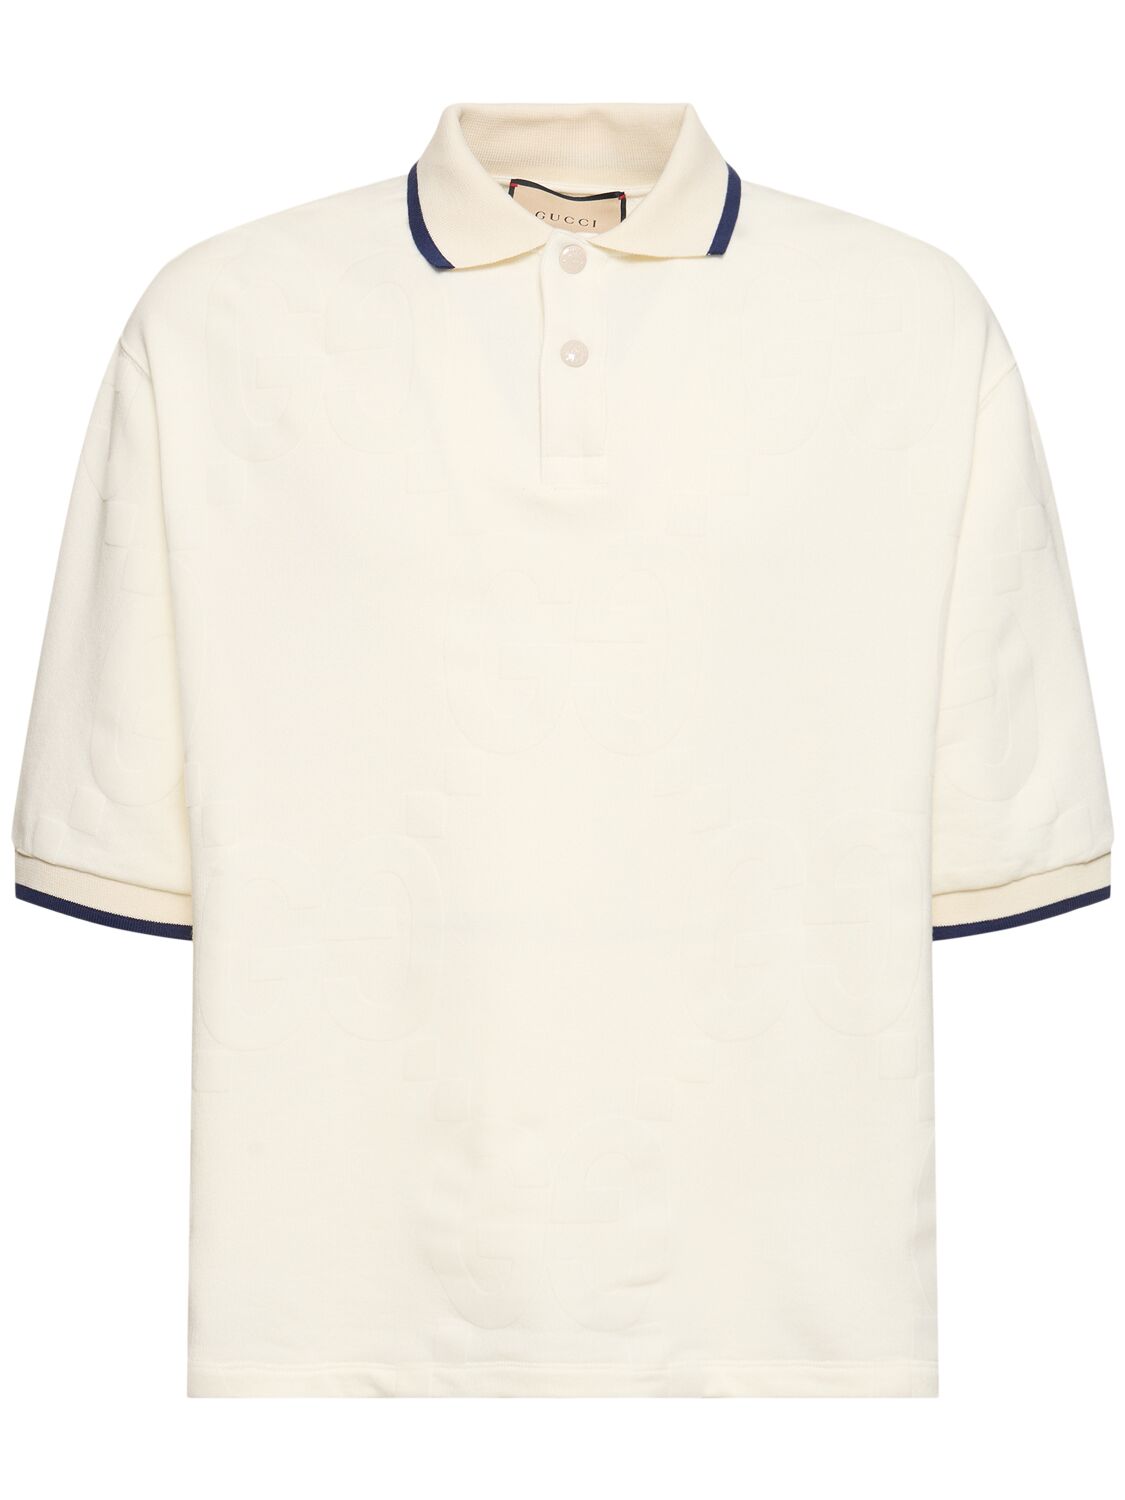 Gucci Light Felted Cotton Jersey Polo Shirt In Ivory